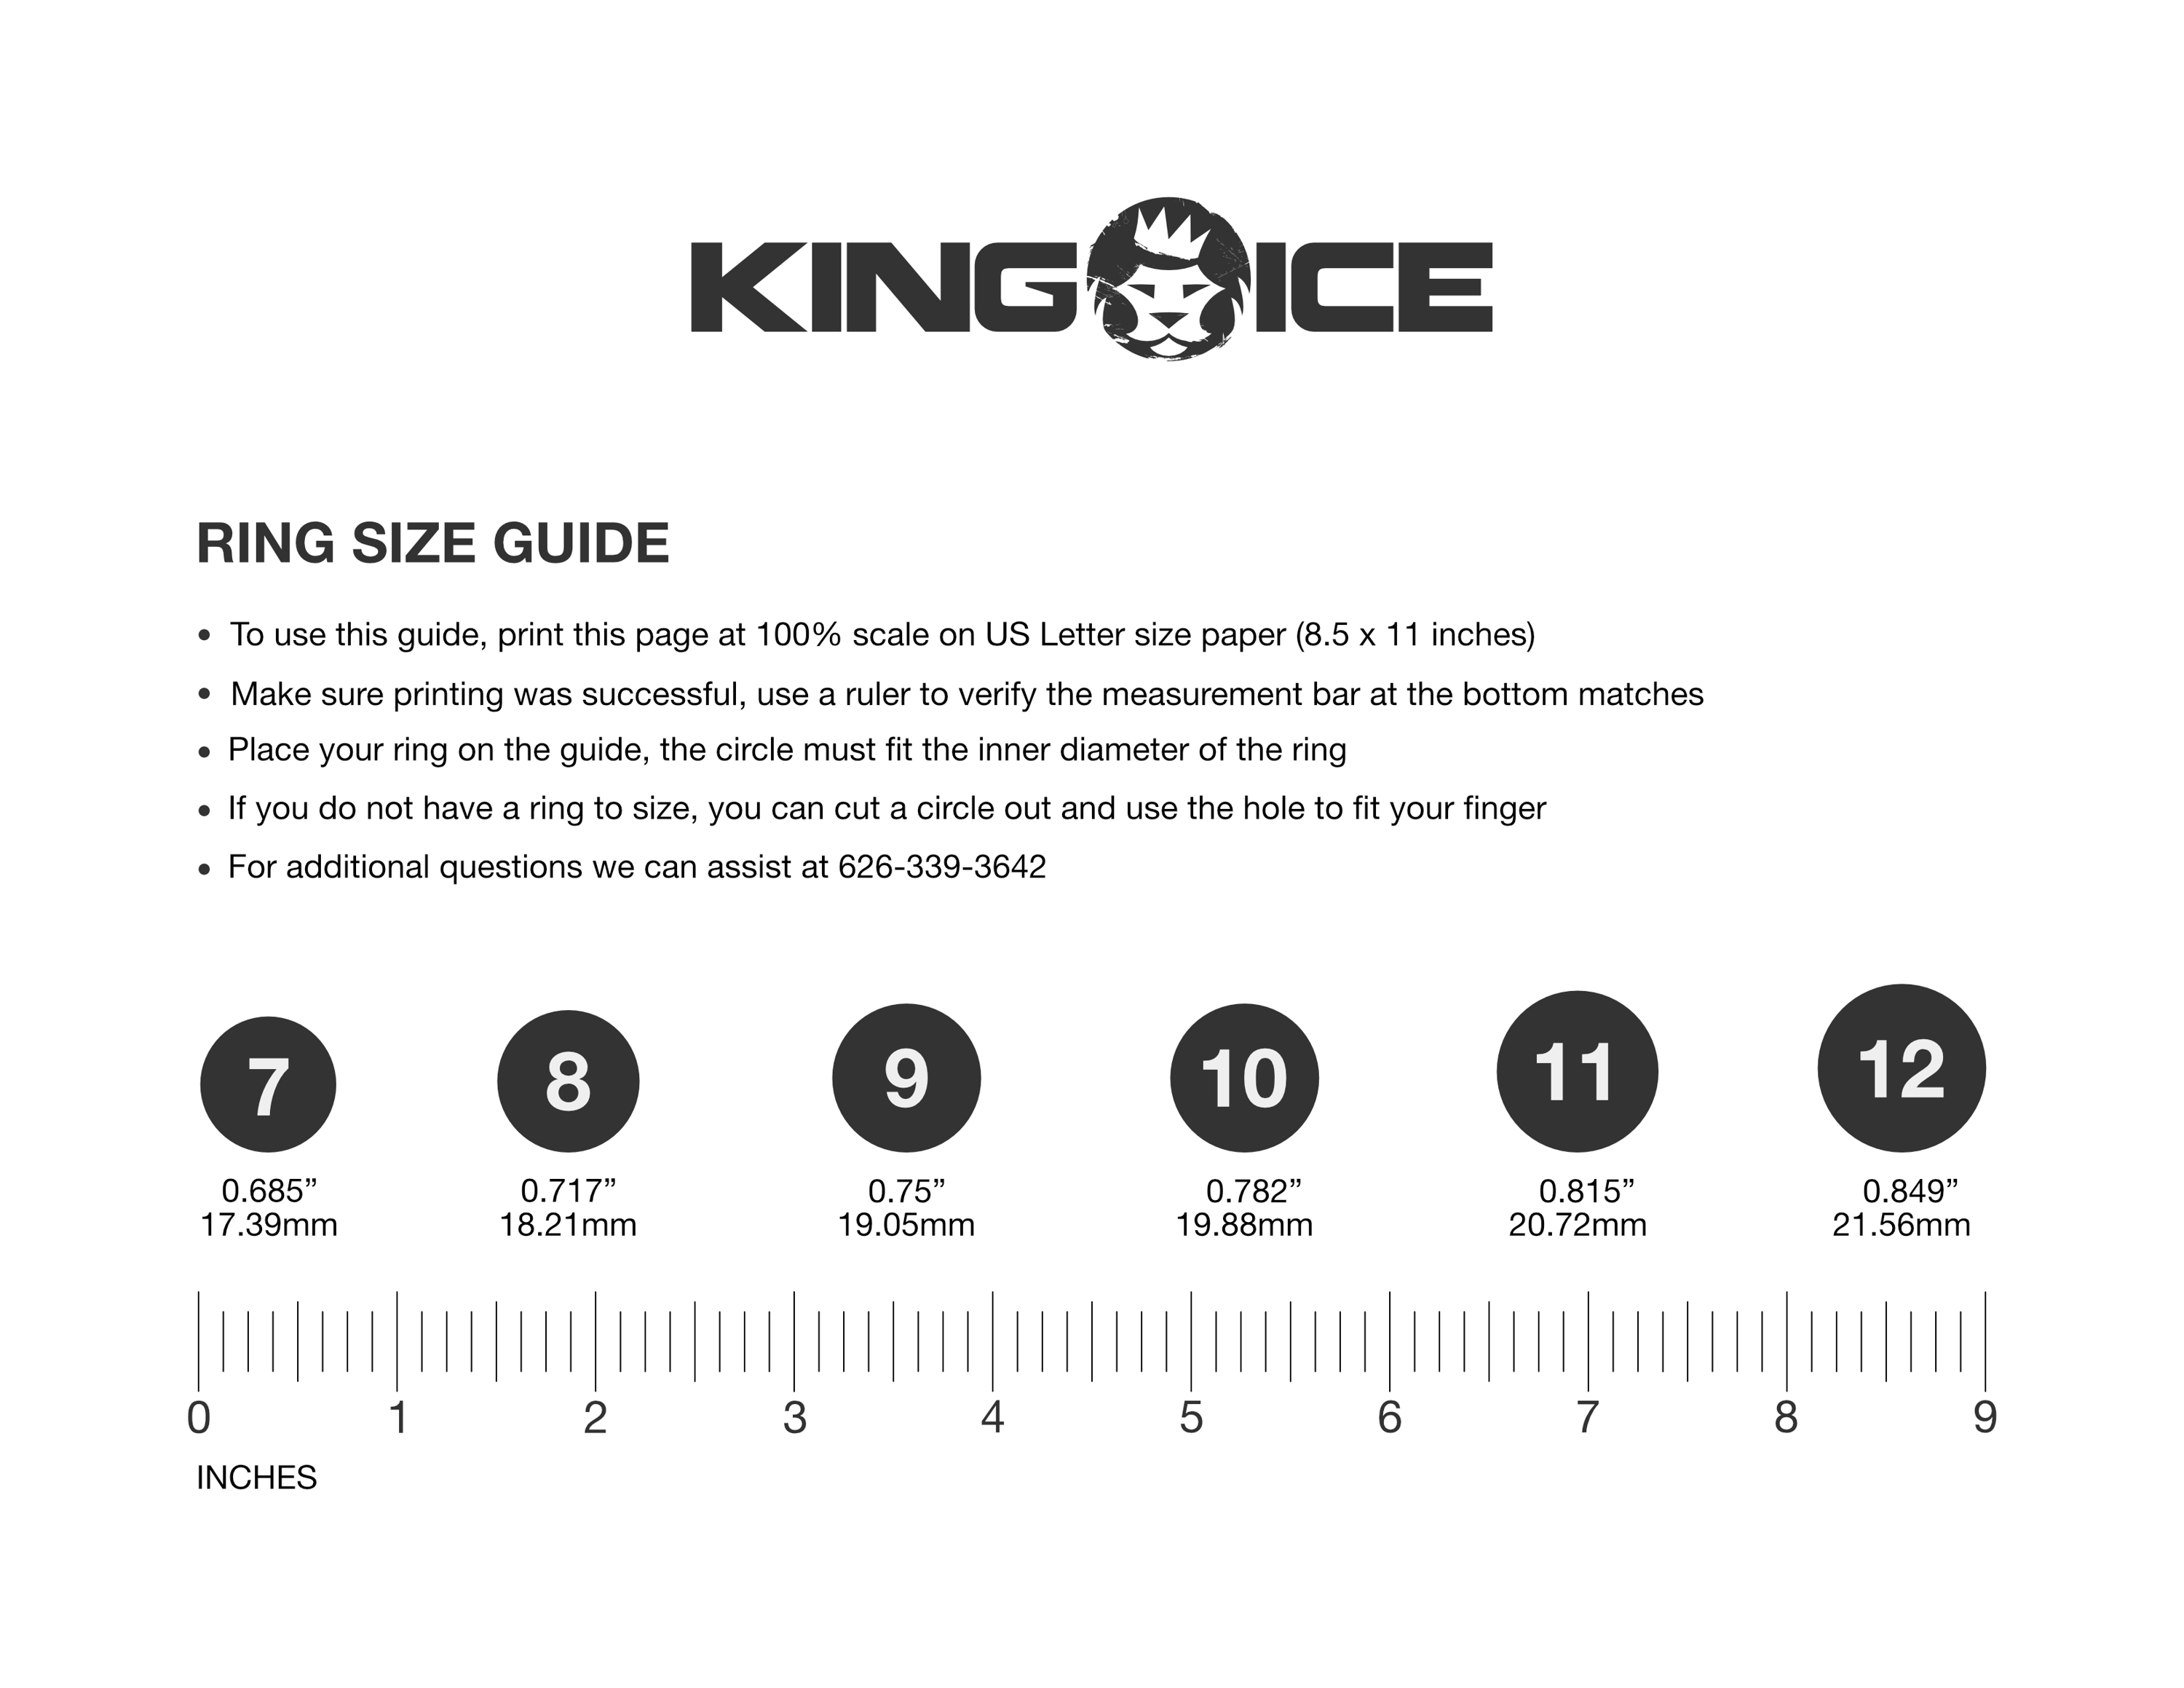 Jewelry and Apparel Size Guides